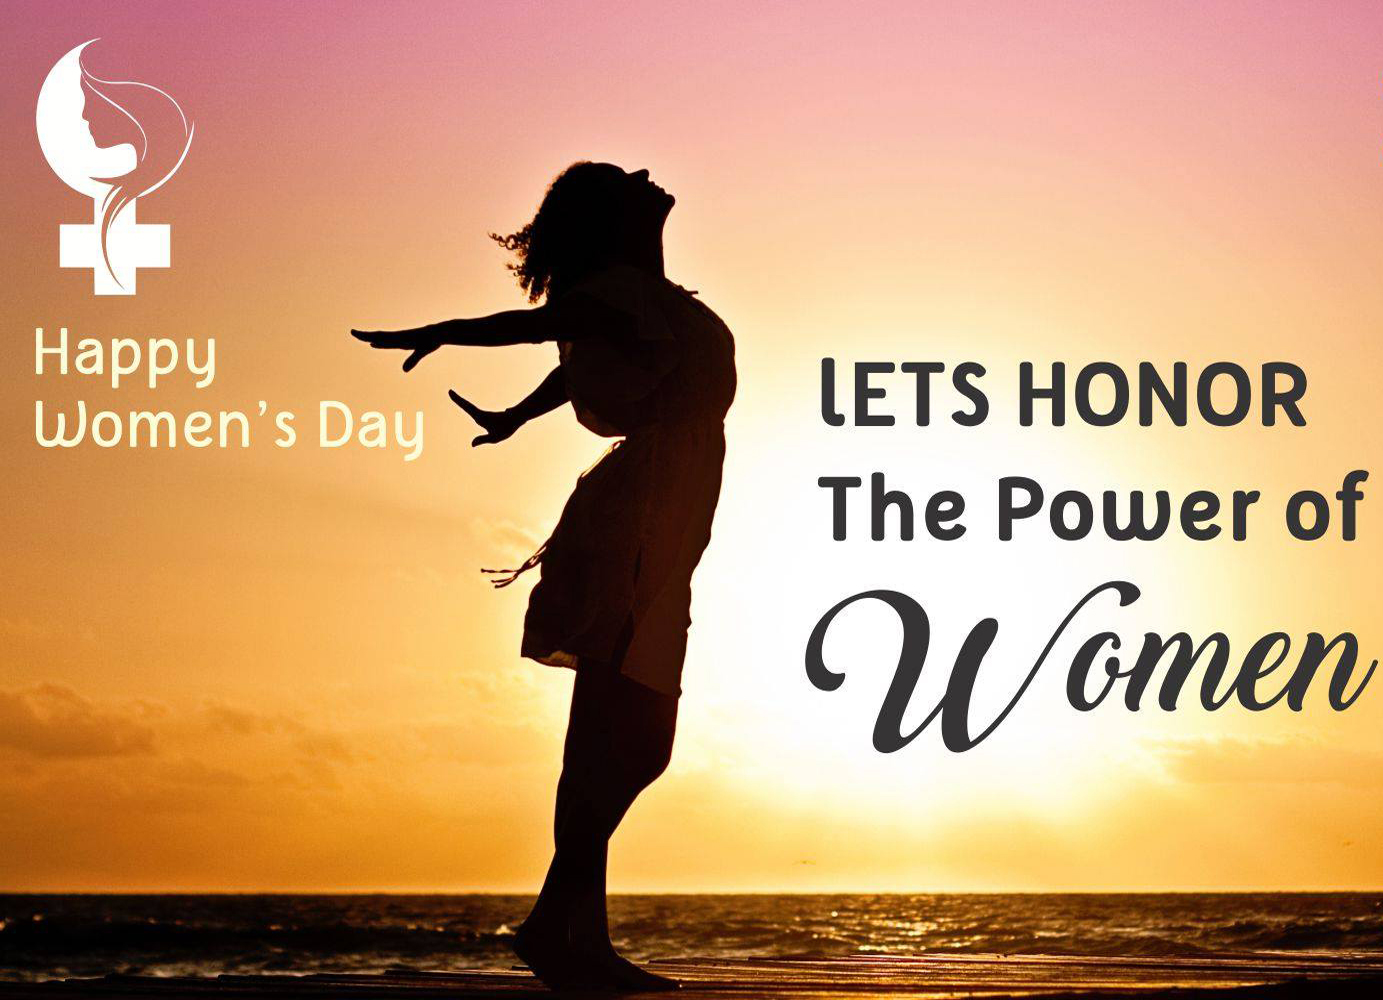 Happy Women's Day Images - Womens Day 2019 Quotes